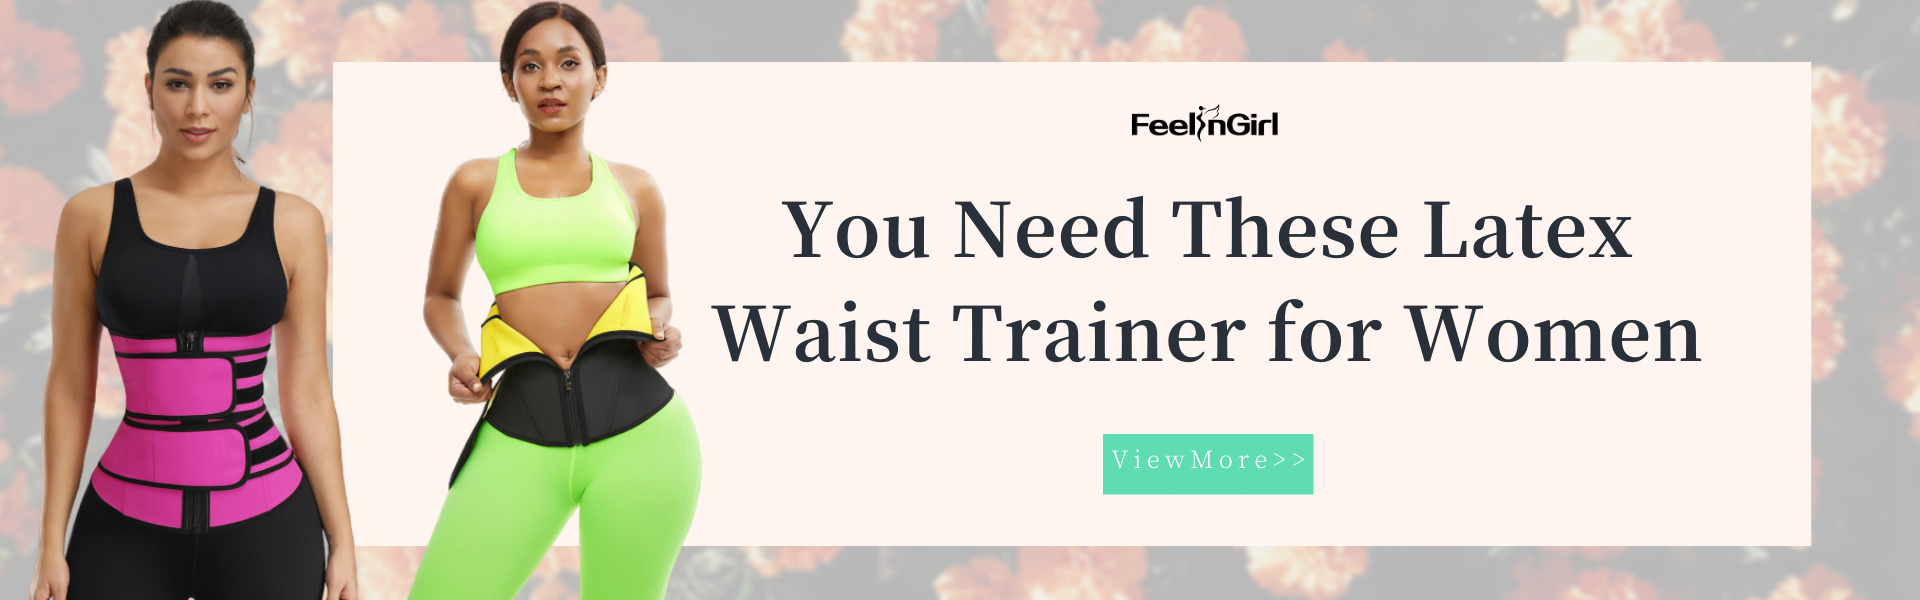 You Need These Latex Waist Trainer for Women